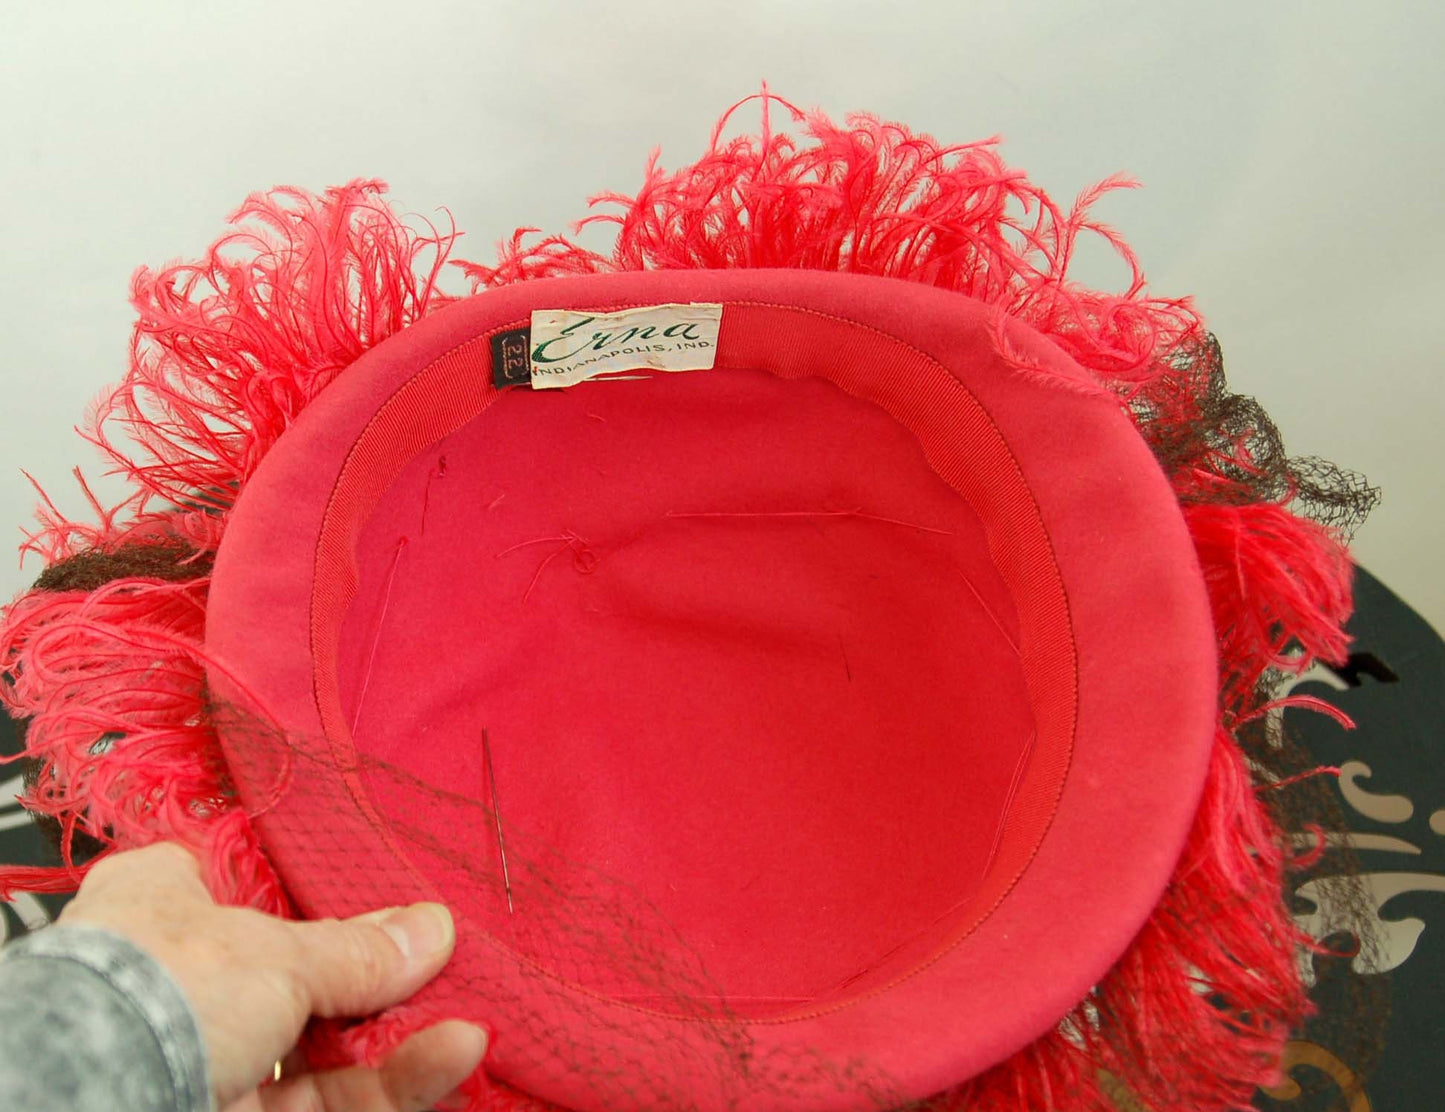 1940s hat with ostrich feathers hot pink long feathers hat by Erna Size 22